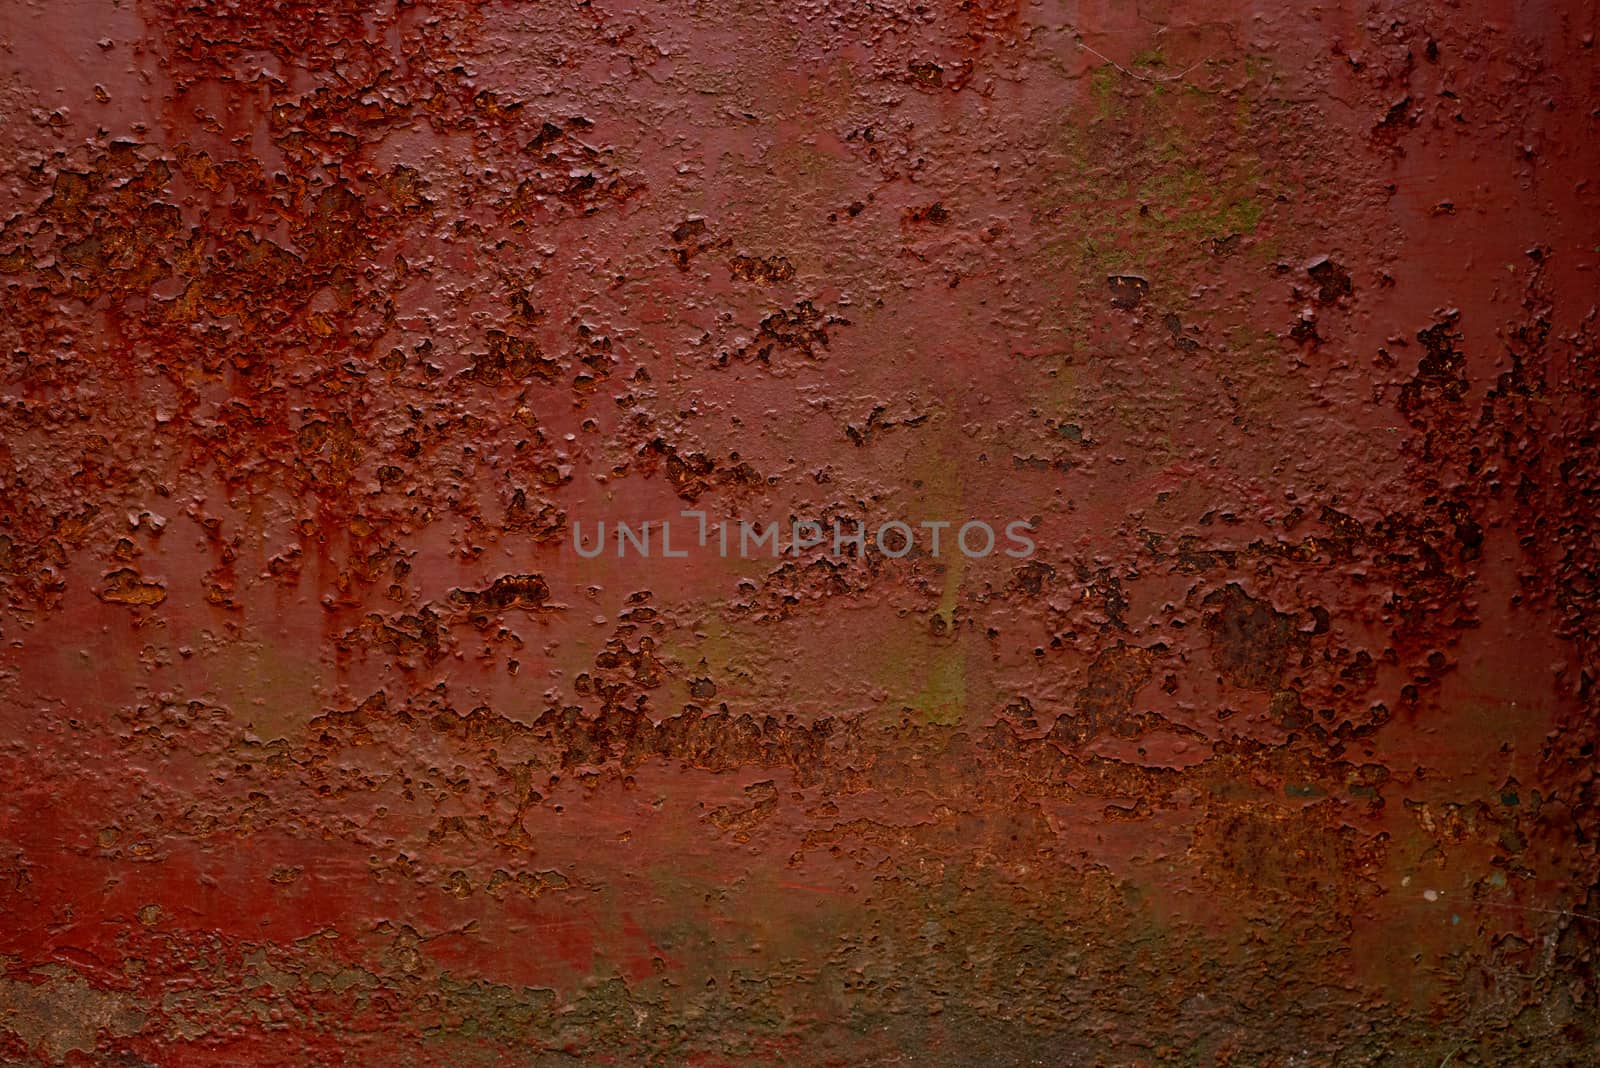 Abstract colorful image painted in red on an outdoor rotten metal